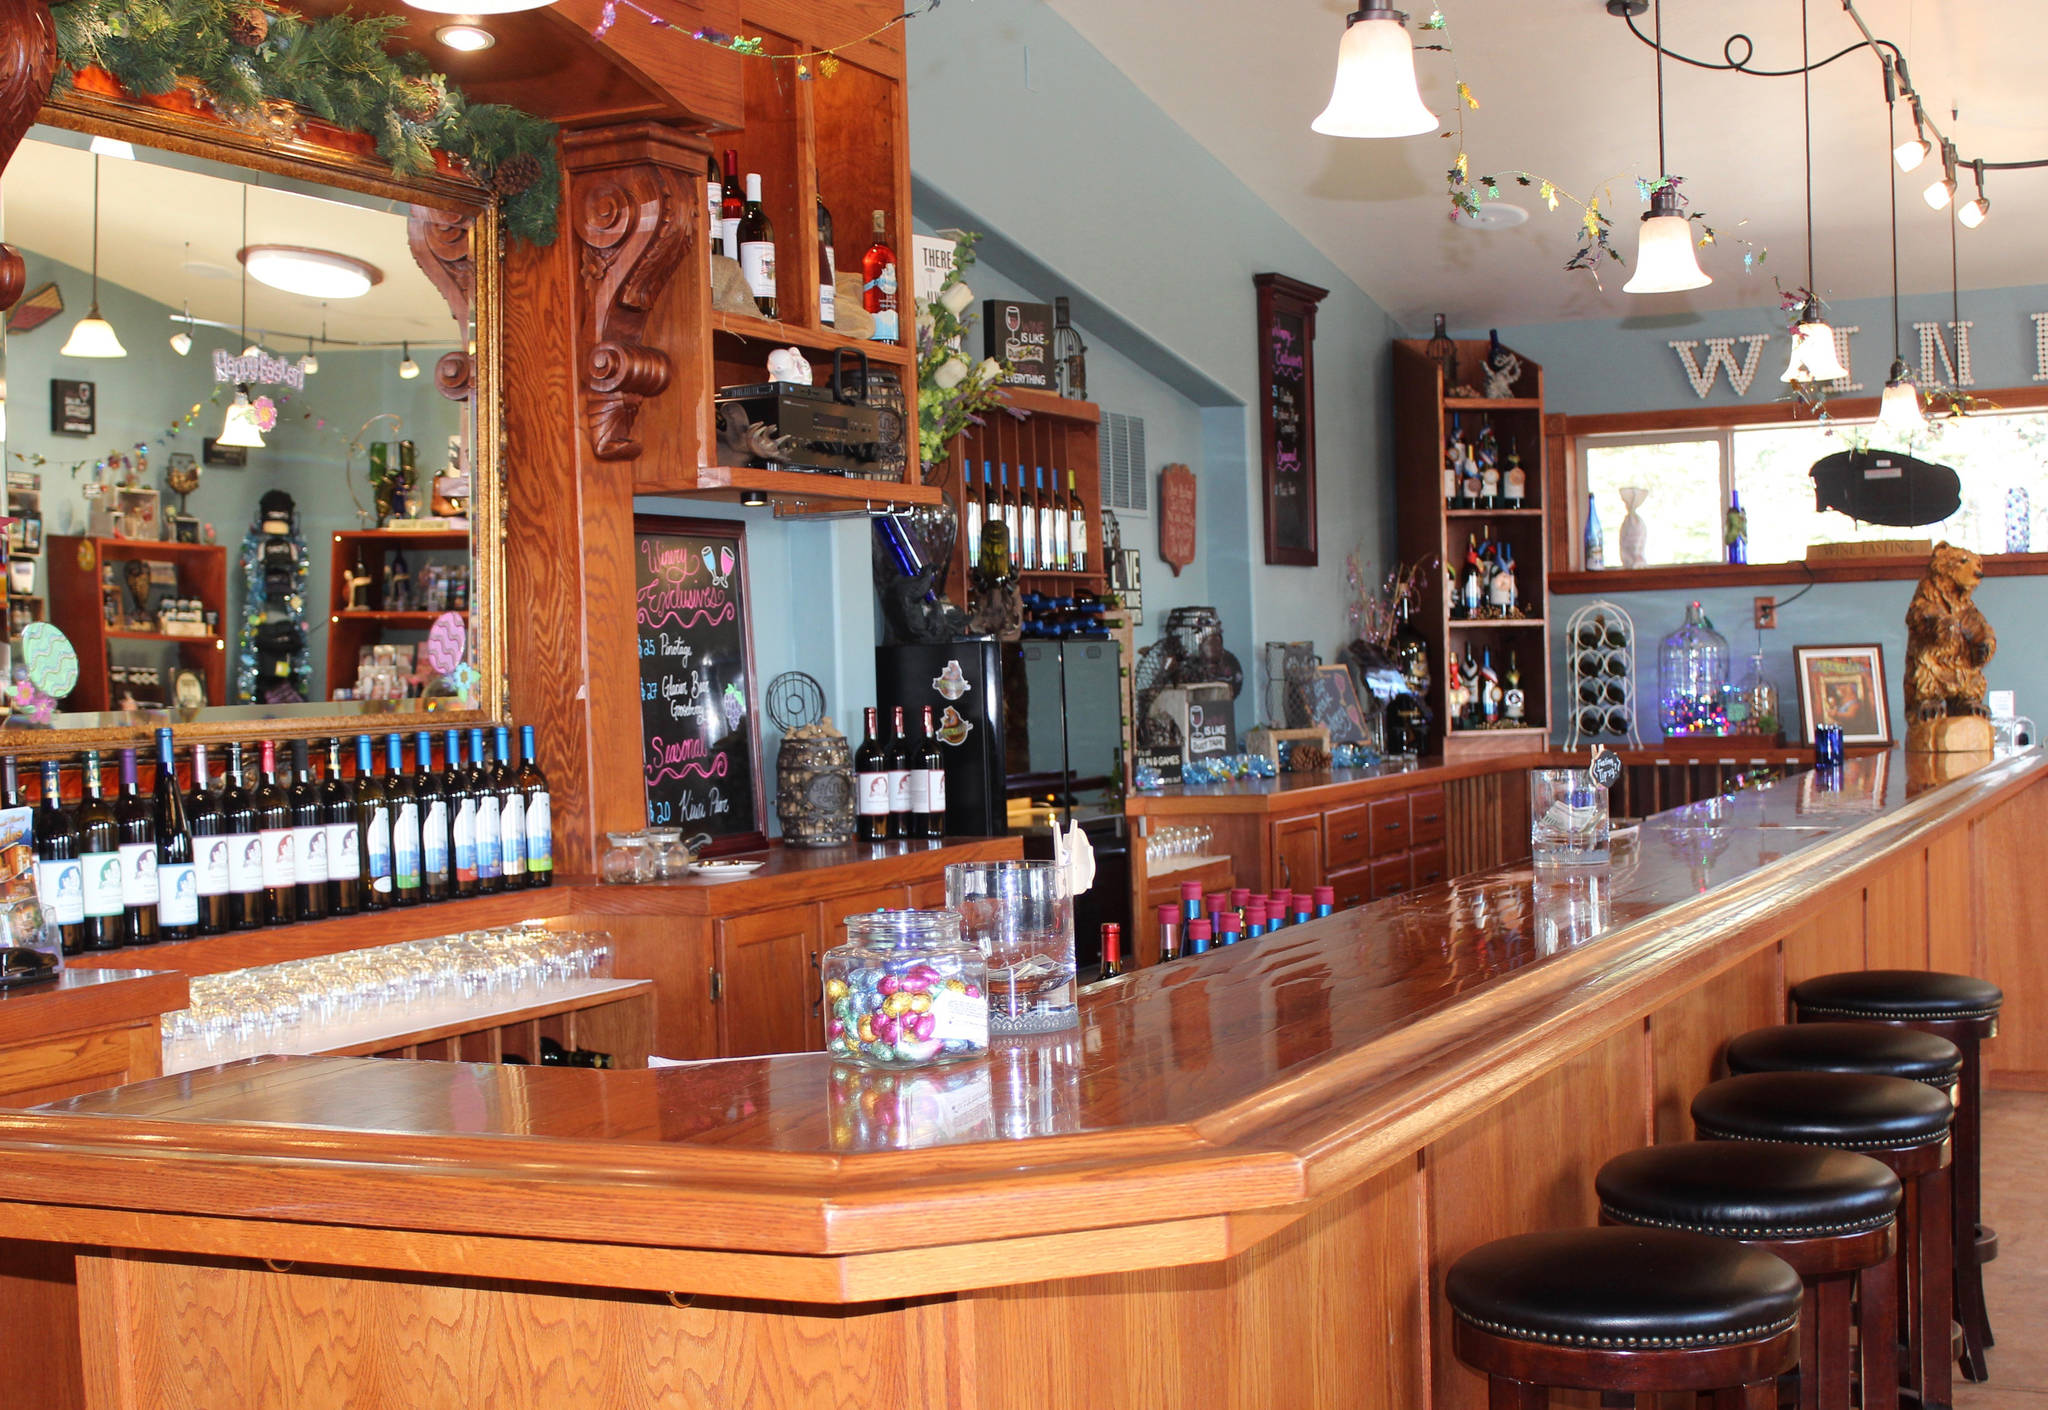 Bear Creek Winery’s tasting room offers both of the winery’s brands, as seen here in this photo taken April 17, 2019. The original Bear Creek brand has nine wines on the tasting list year-round and five seasonal wines. Five different wines are under the Glacier Bear brand, made strictly from Alaskan-grown berries and fruits at its location in Kachemak City, Alaska. (Photo by McKibben Jackinsky)